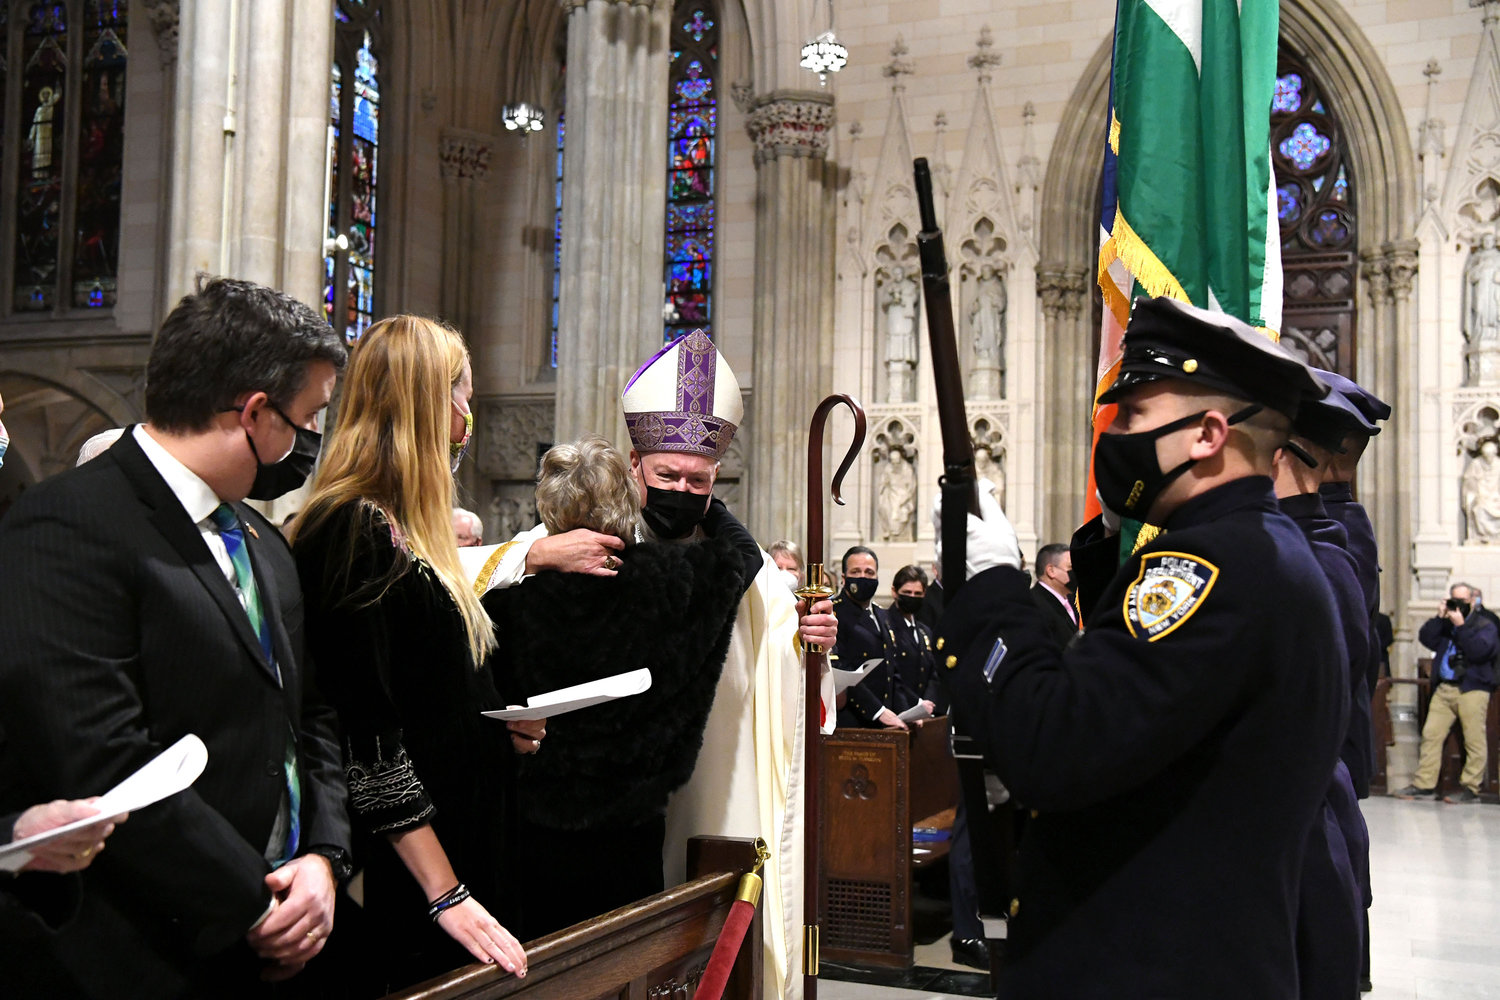 Cardinal Dolan greets Patti Ann McDonald, widow of NYPD Det. Steven McDonald, during the procession at the Memorial Mass for the late detective Jan. 18 at St. Patrick’s Cathedral. Also in the pew are son Conor McDonald, far left, and his wife, Katie.